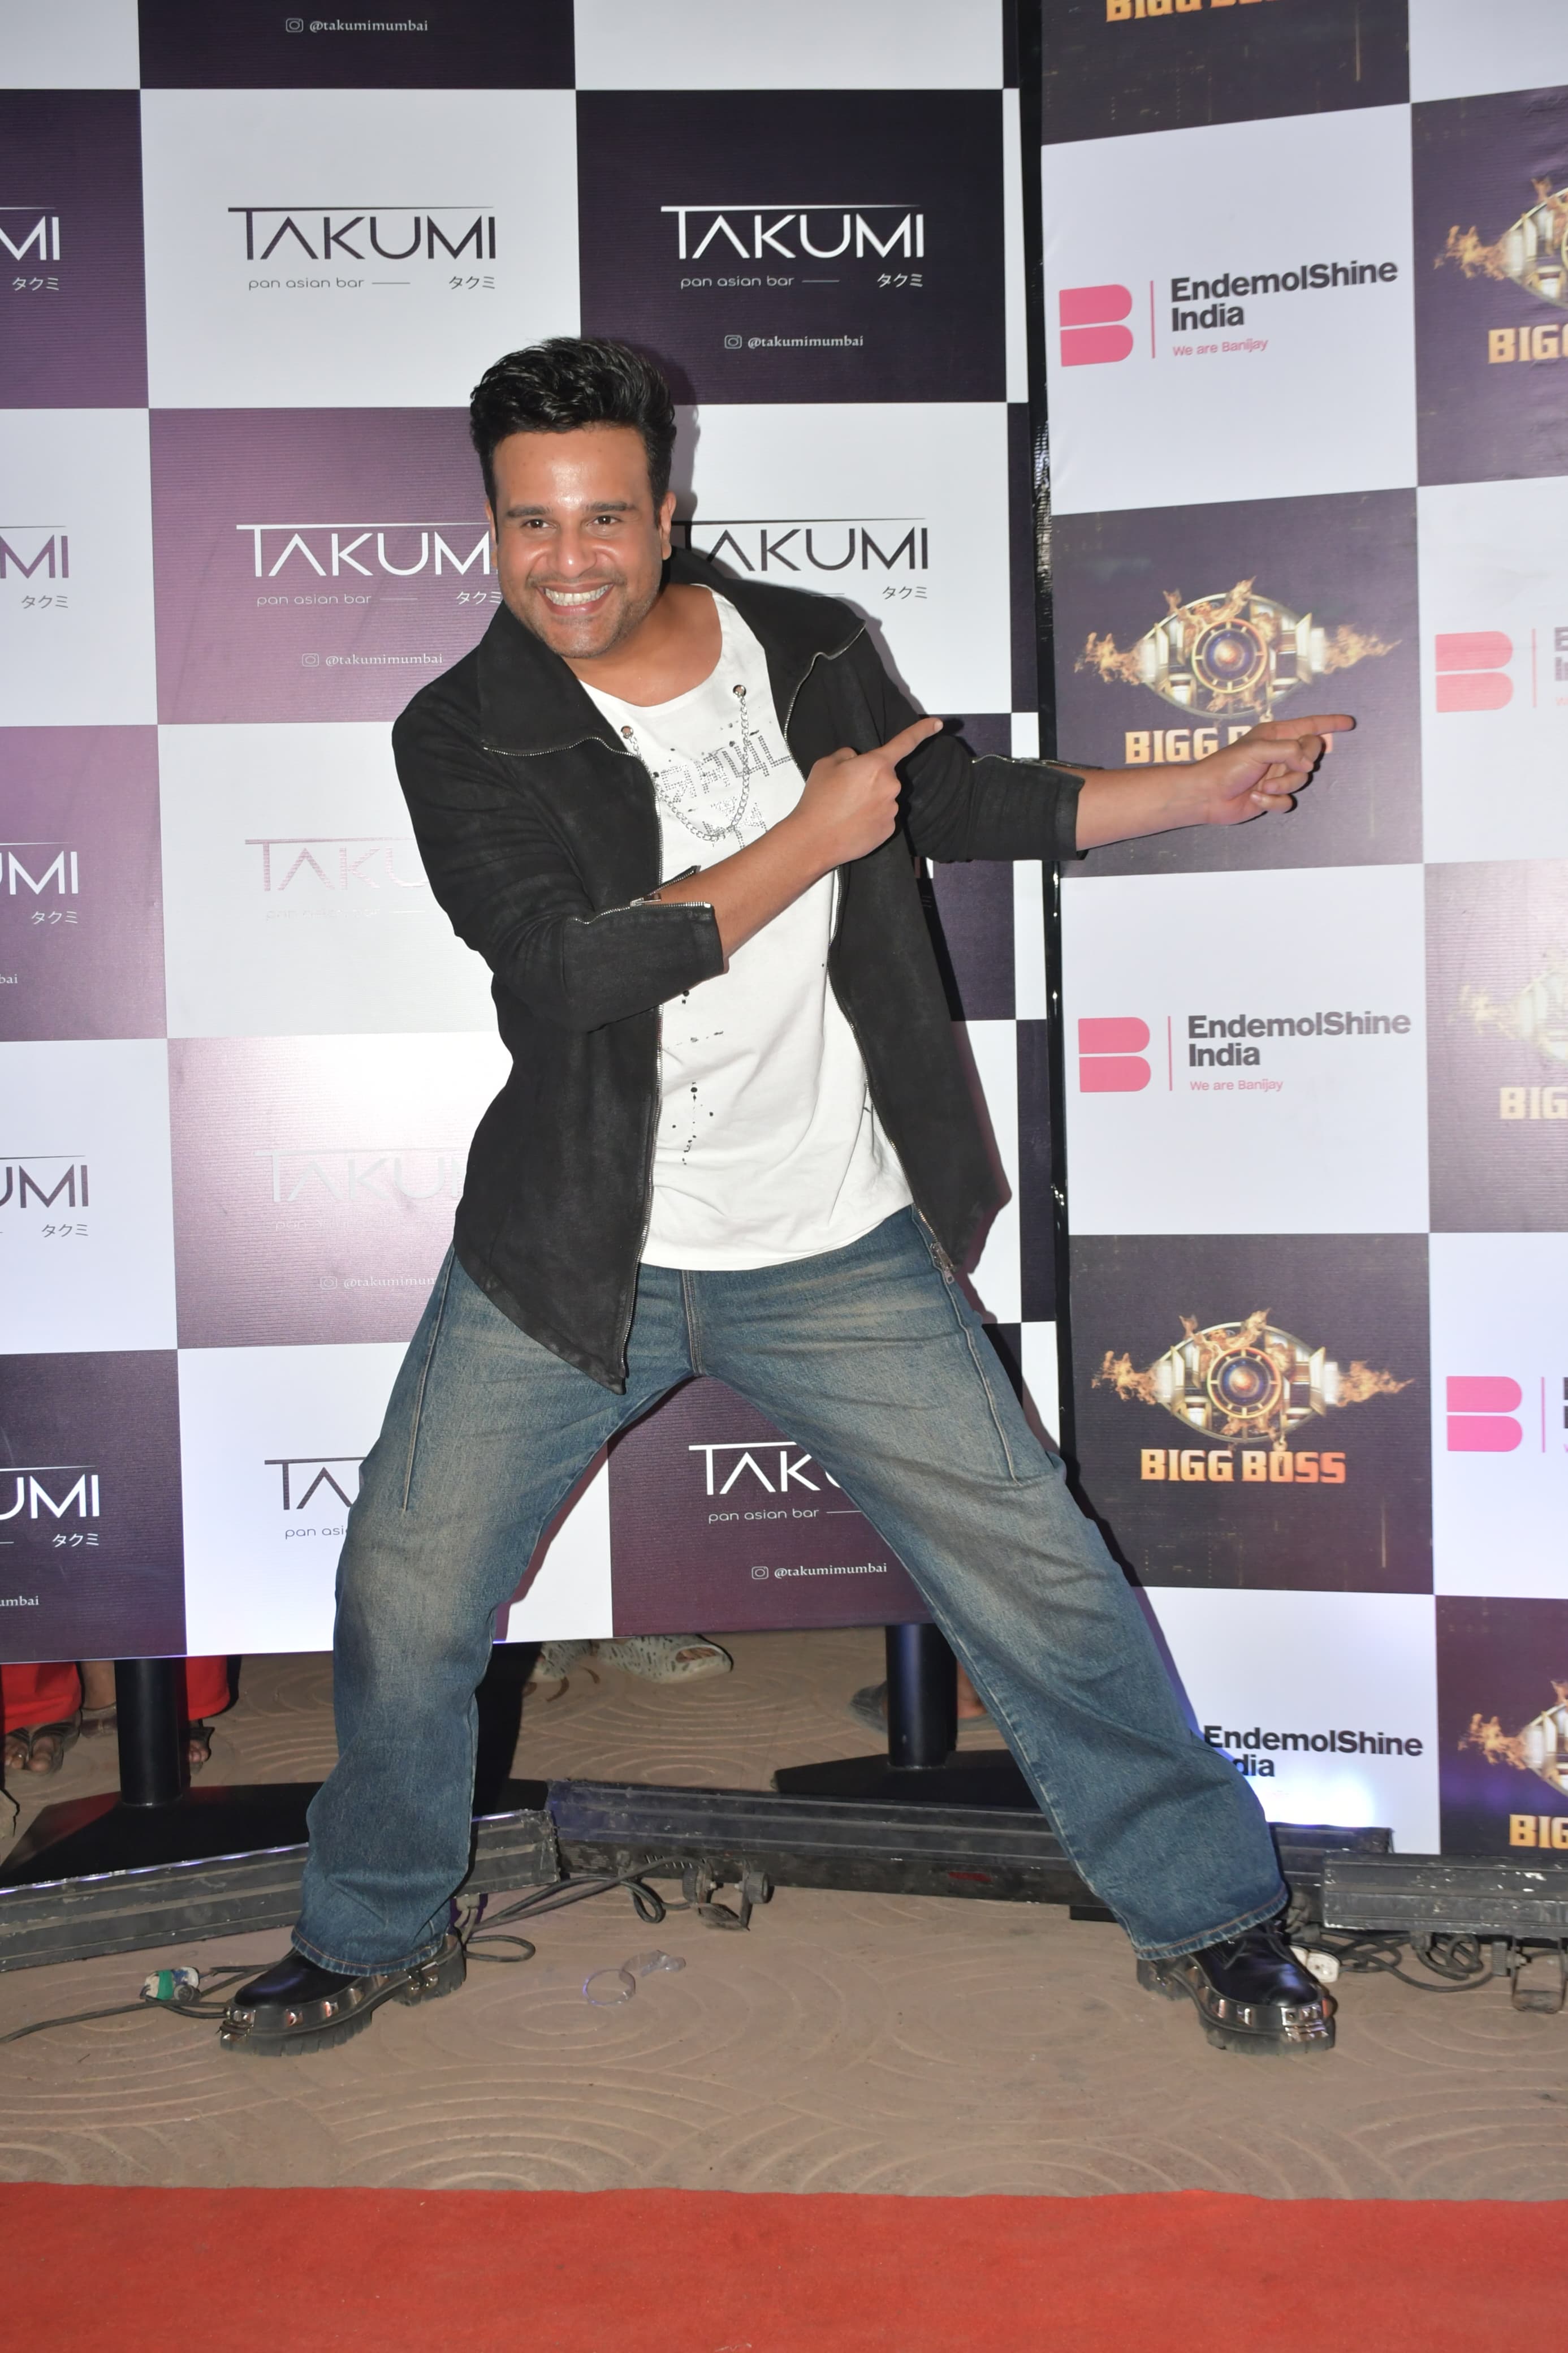 Actor and comedian Krushna Abhishek also came in to celebrate the reunion